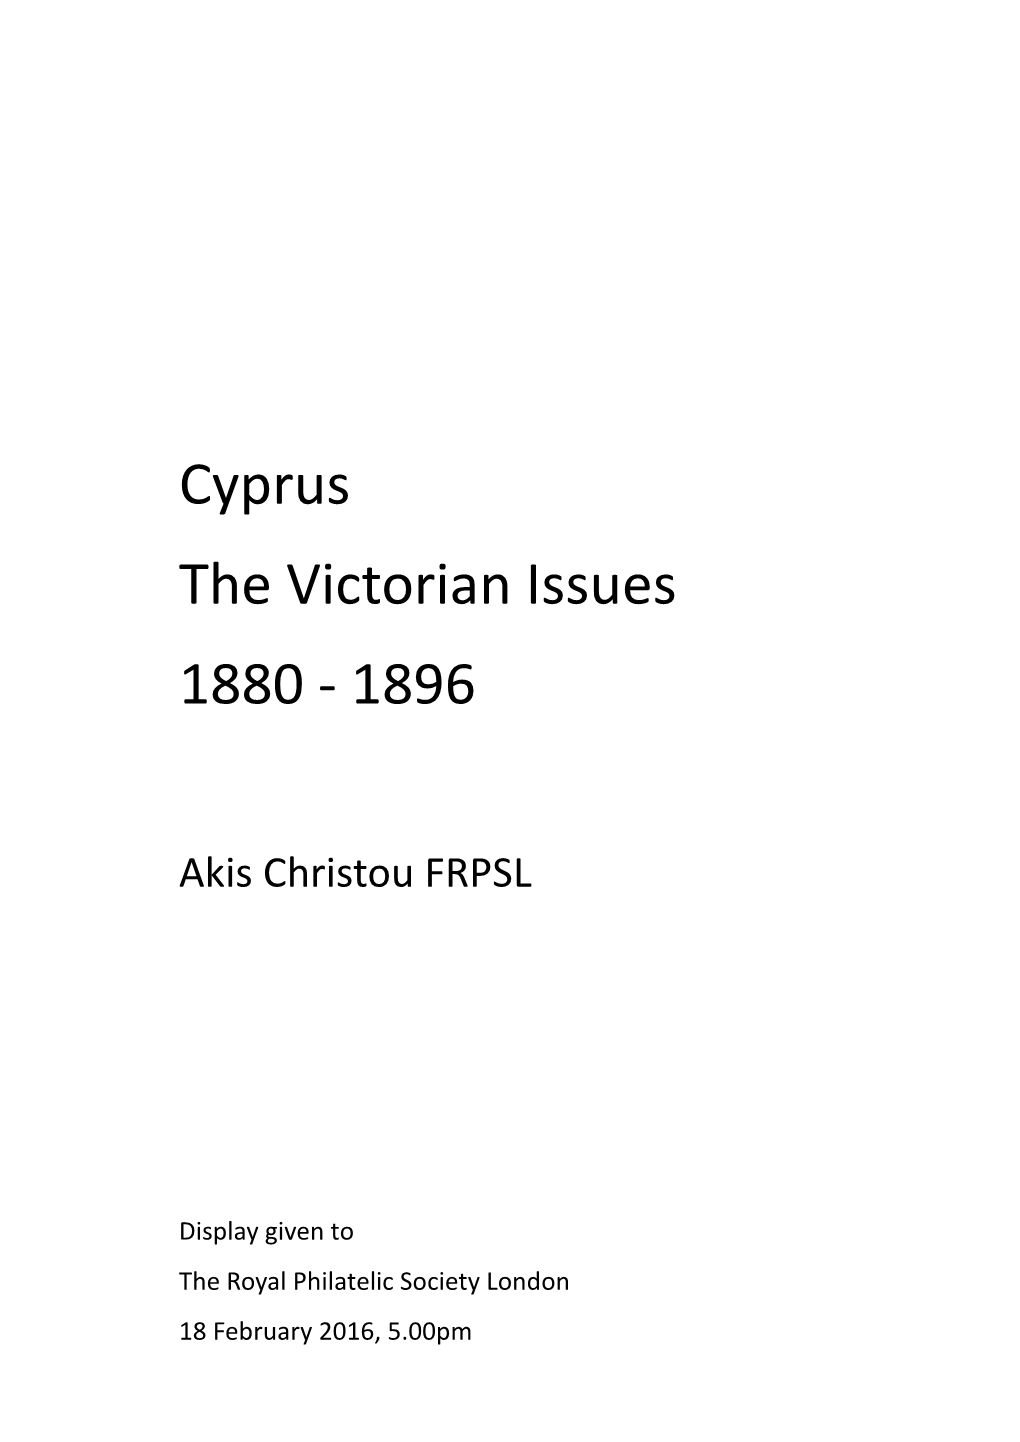 Cyprus the Victorian Issues 1880 - 1896